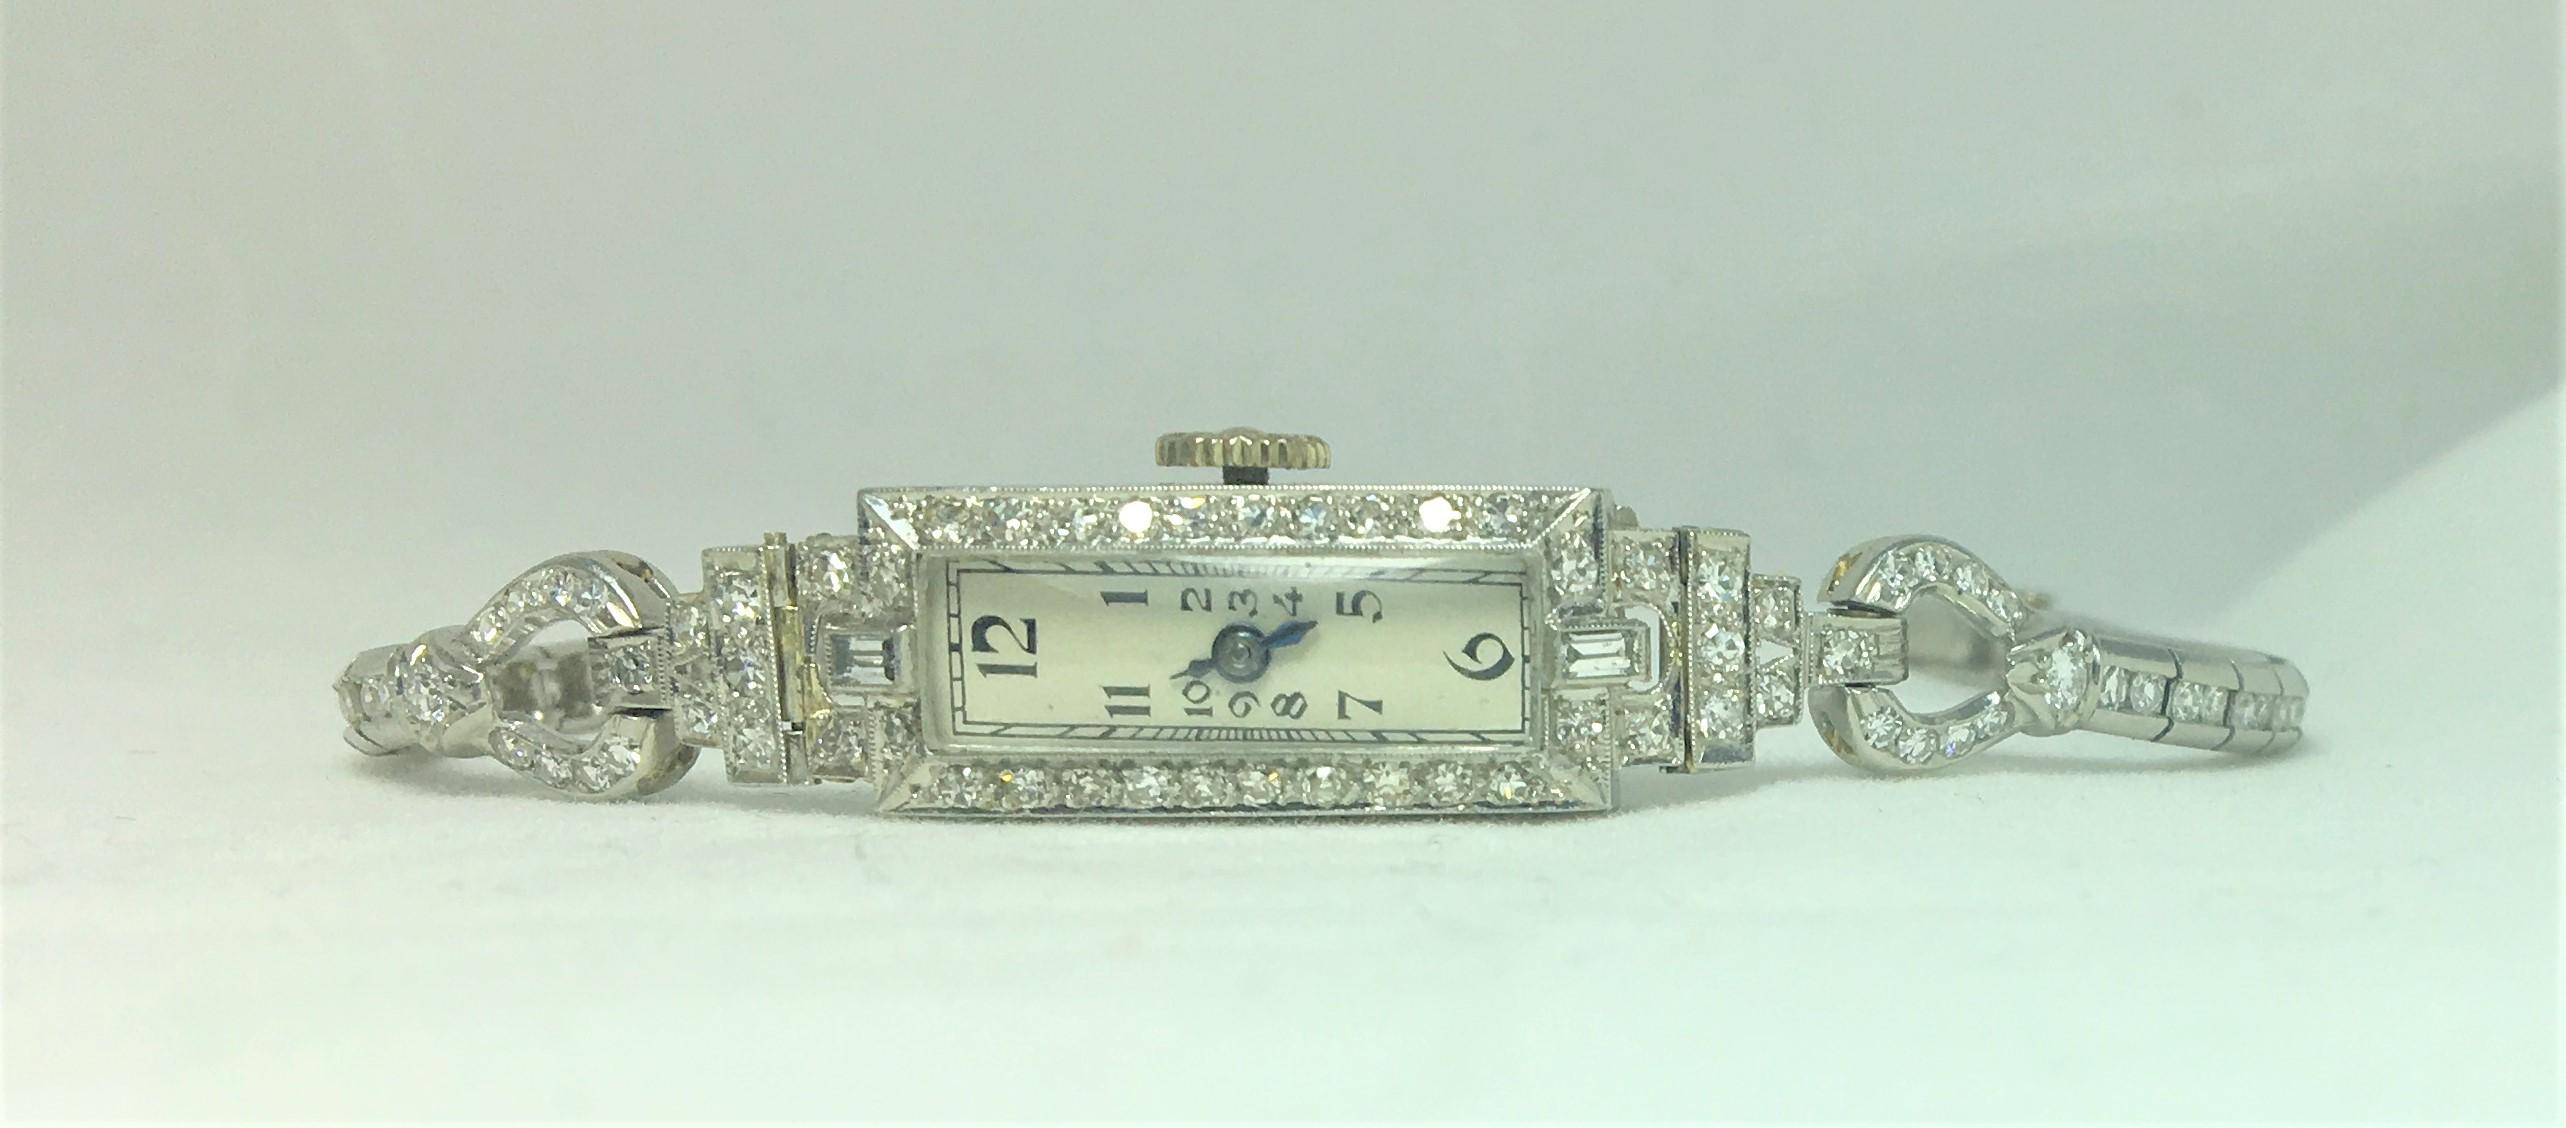 This watch has a slender, sleek design
Approximately 2 carats total diamond weight,
108 diamonds ranging in size from approximately .01 to .03 carat each
6 inches long
Platinum 
Watch is working with original parts.
Fold over clasp with second fold